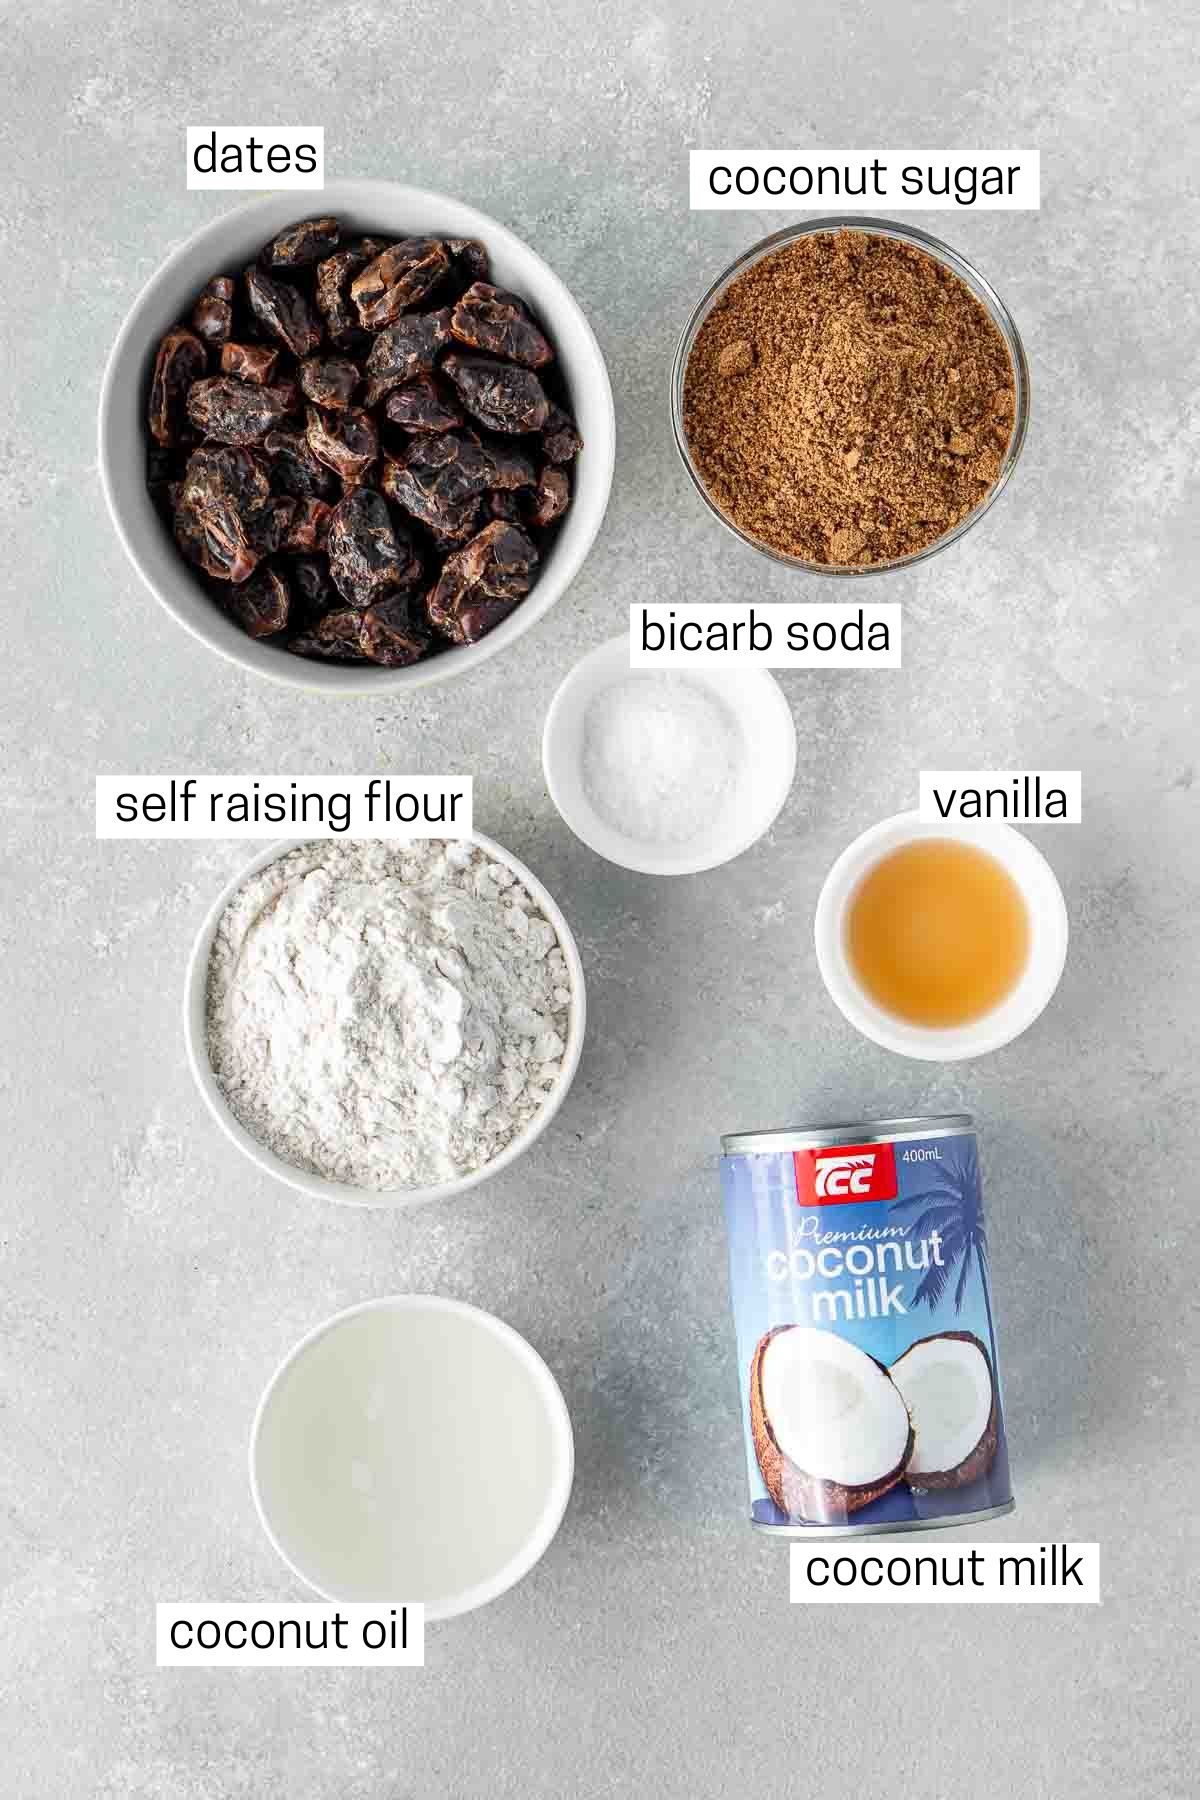 All ingredients needed for vegan sticky date pudding laid out in bowls.